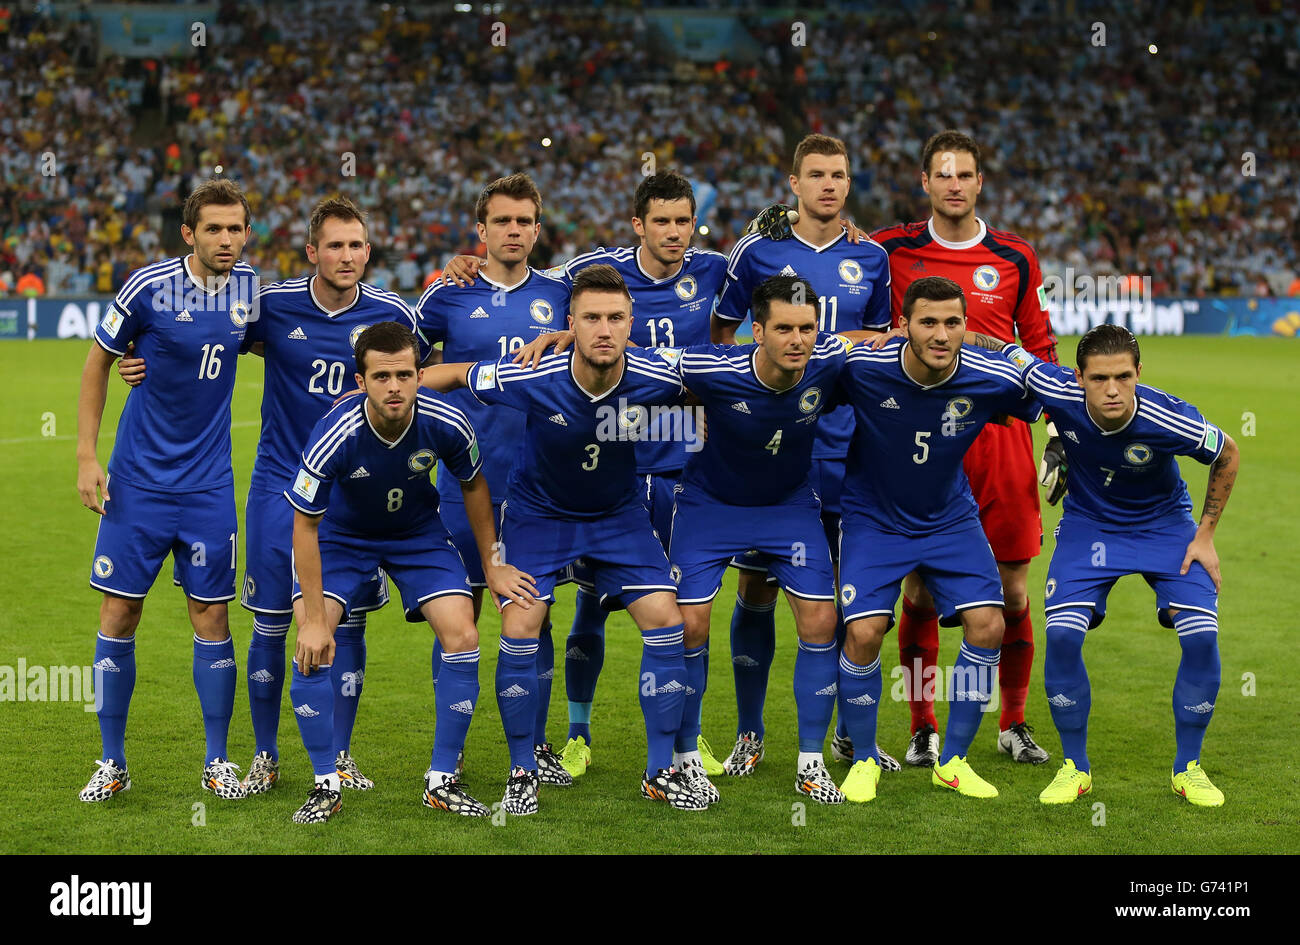 Soccer - FIFA World Cup 2014 - Group F - Argentina v Bosnia and Herzegovina - Maracana. Bosnia and Herzegovina team group Stock Photo